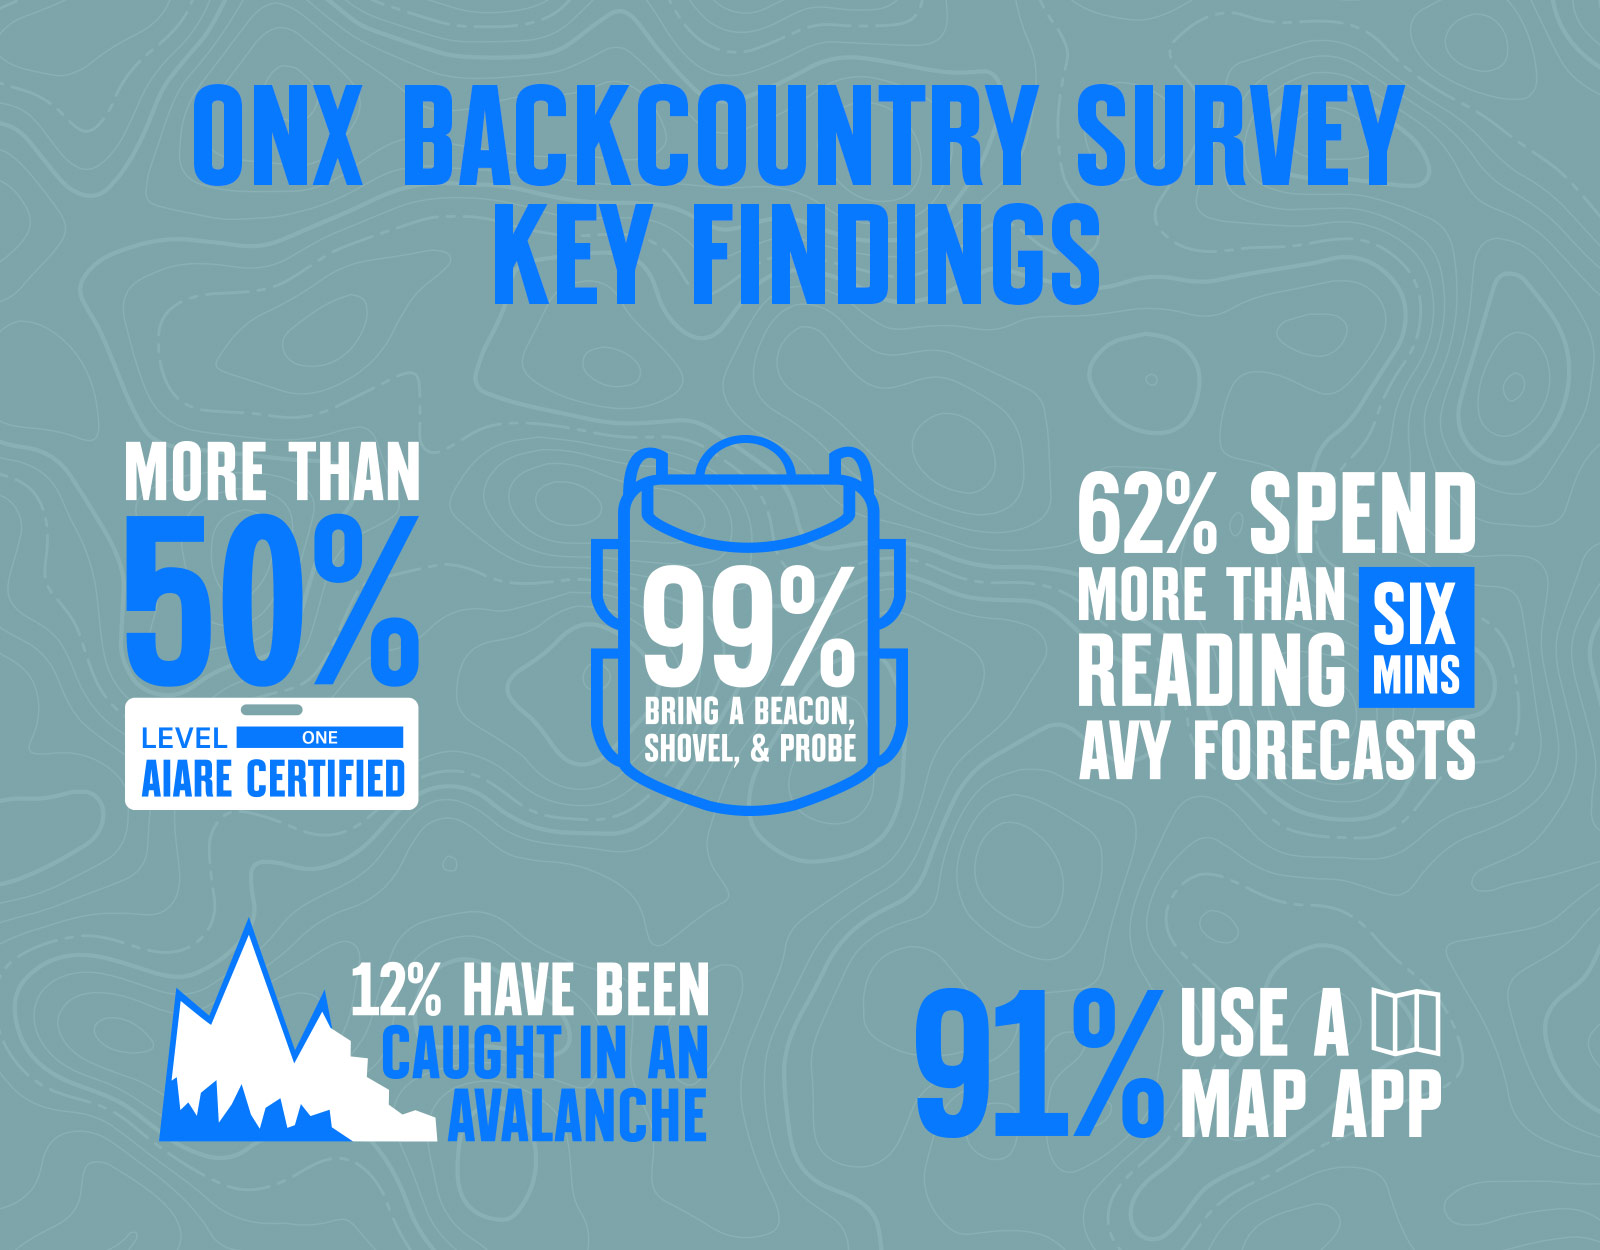 Key findings from an onX Backcountry survey of backcountry users on avalanche risk, avalanche safety and avy reports. 